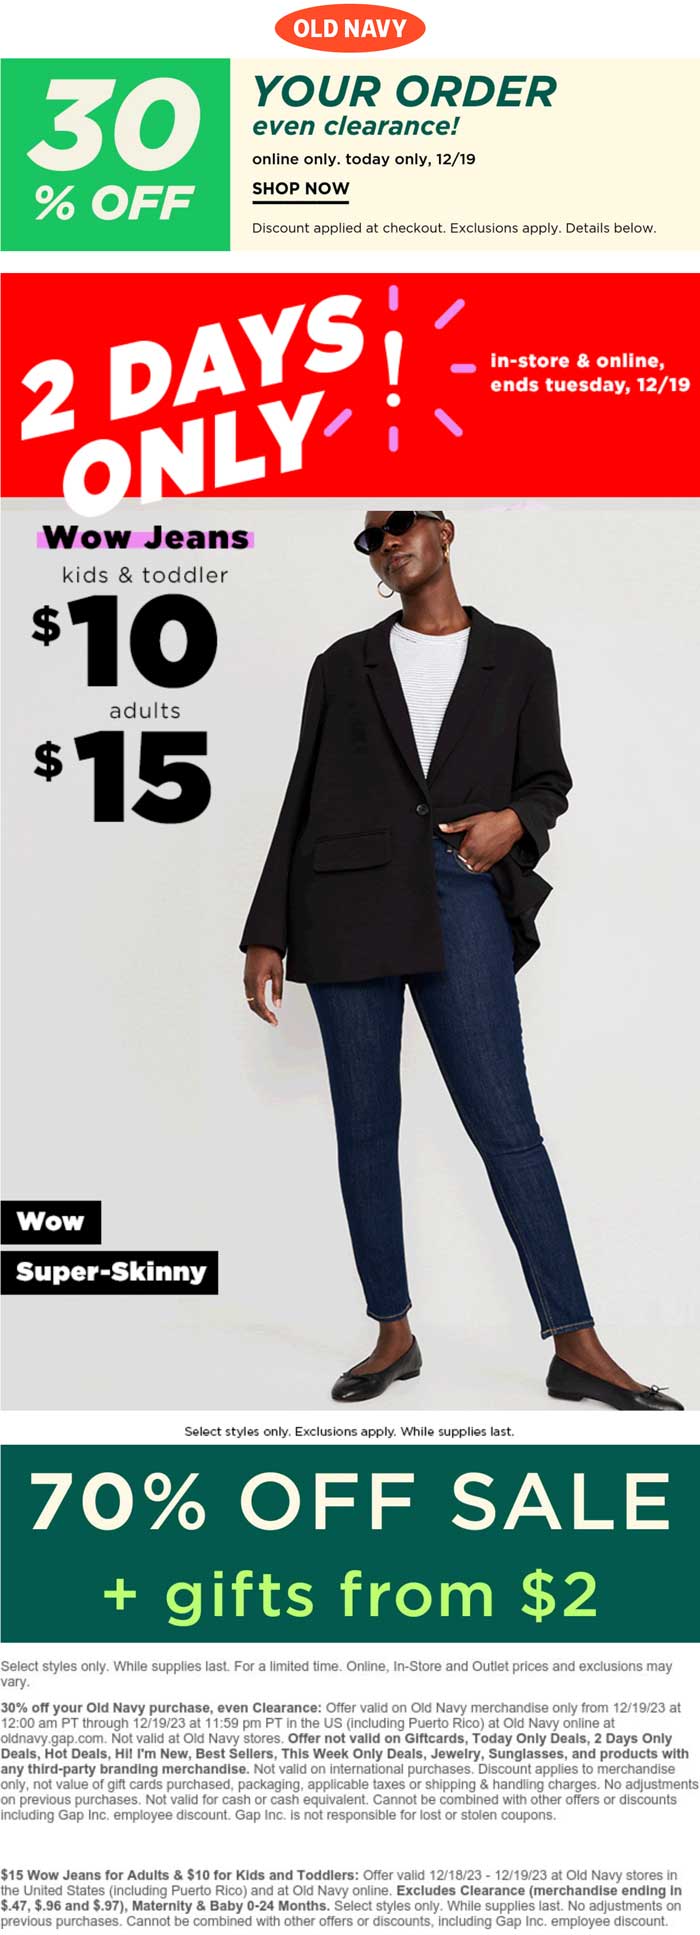 Old Navy stores Coupon  $15 jeans today also 30% off online at Old Navy #oldnavy 